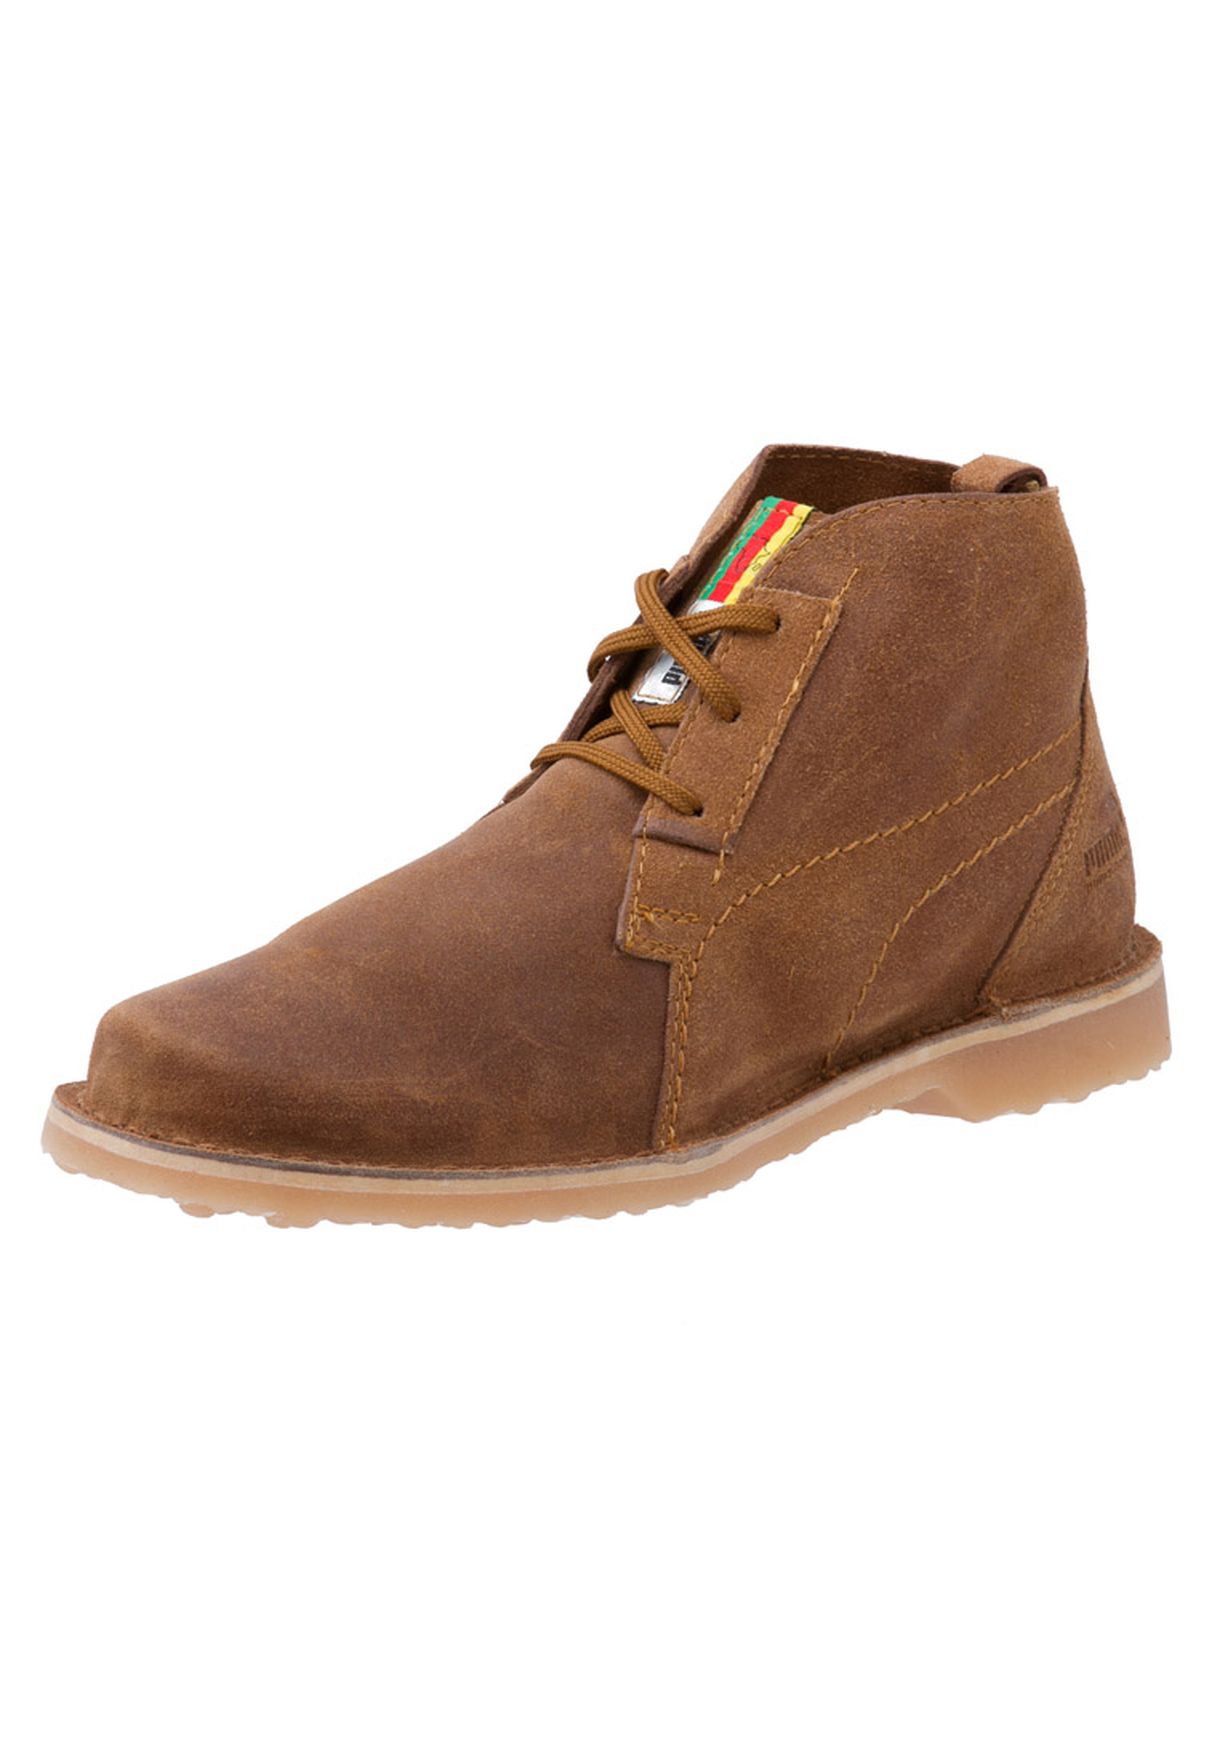 PUMA Terrae Mid Africa Boots for Men 